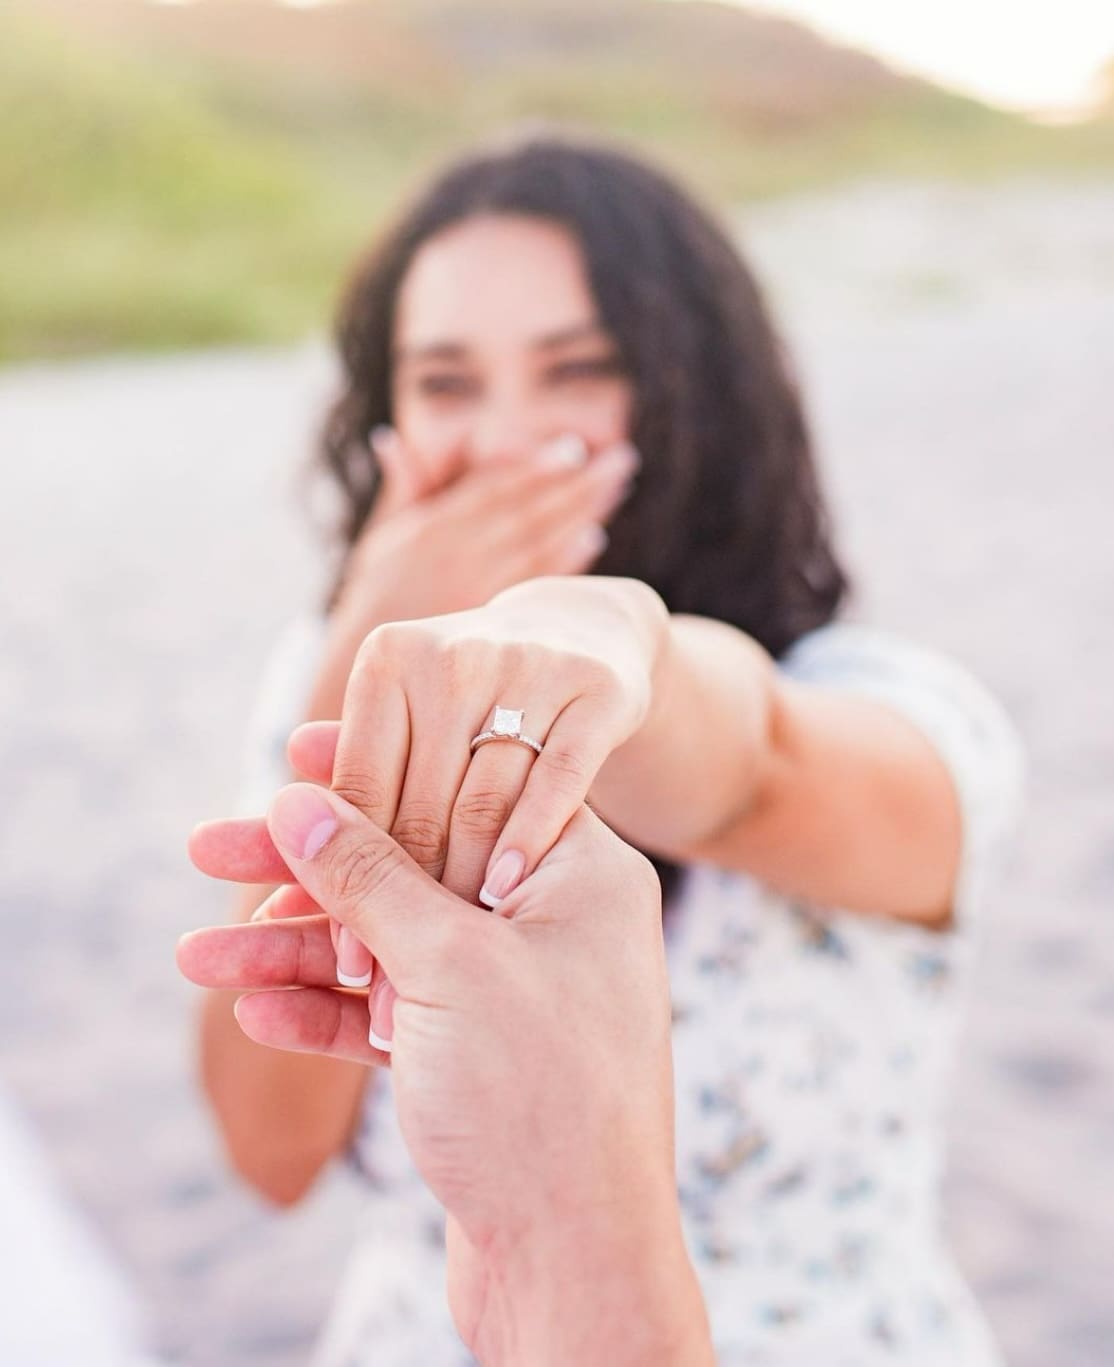 Woman holding hand and has an engagement ring on